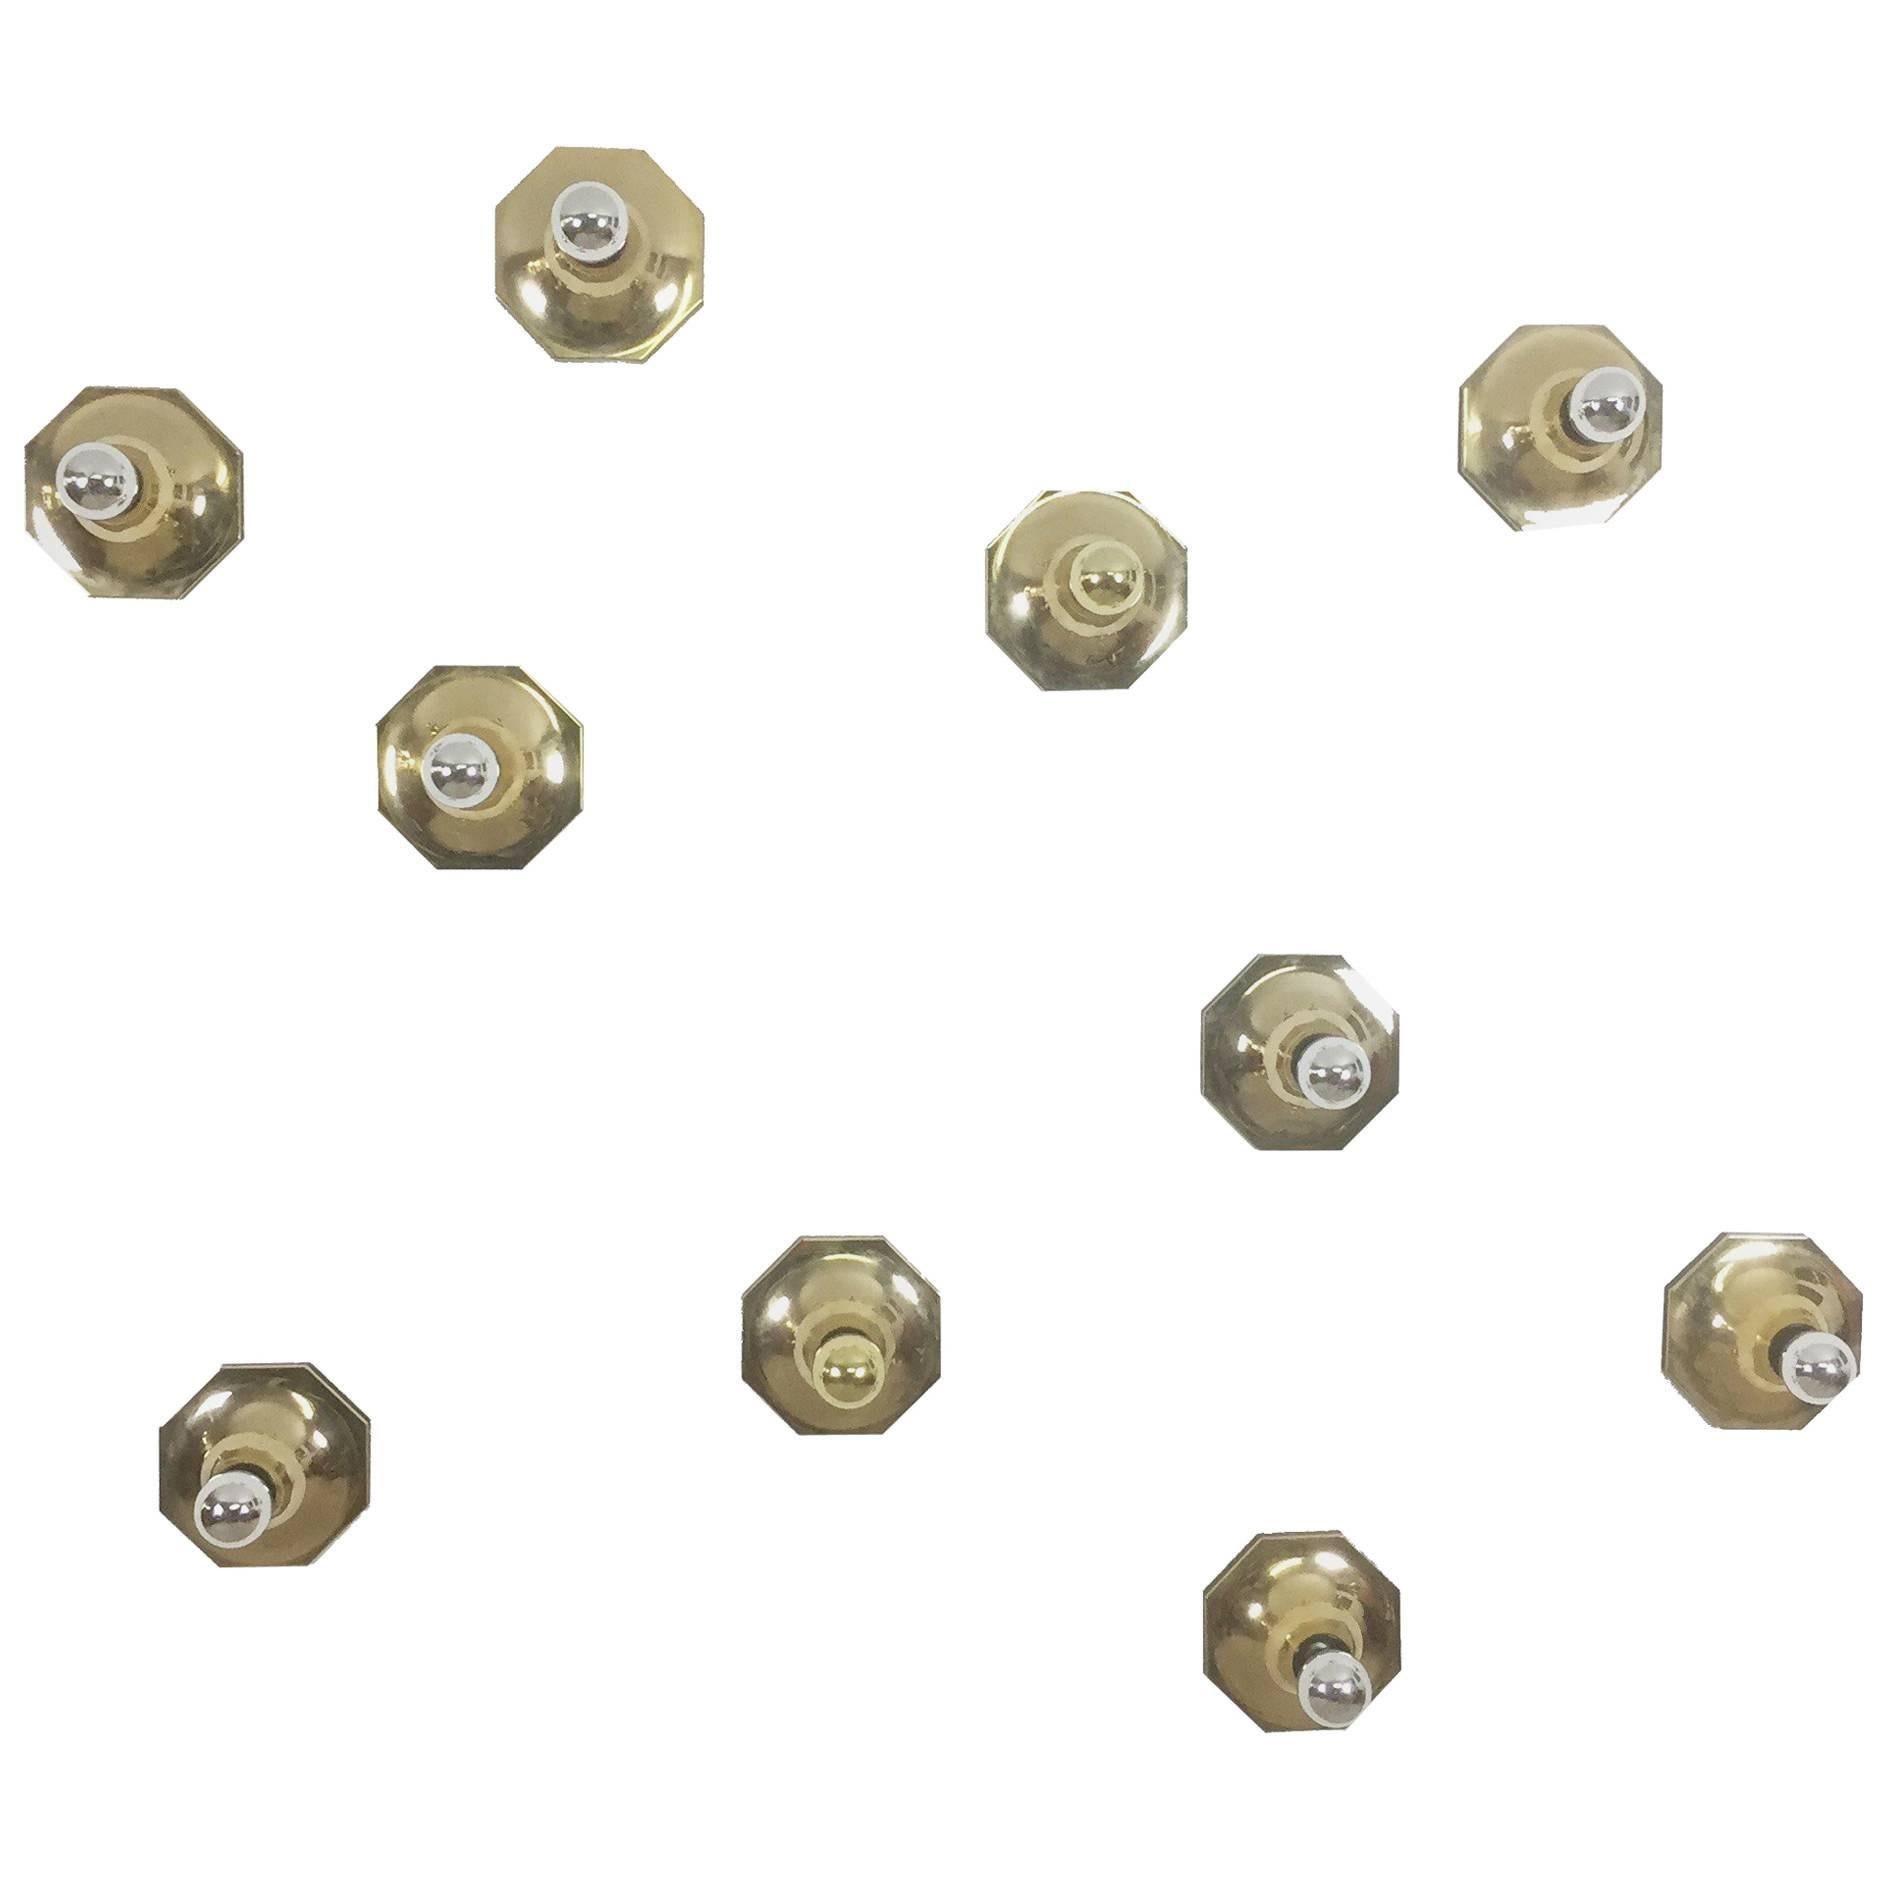 Set of Ten Golden Cubic Wall Lights by Motoko Ishii for Staff Lights, Germany